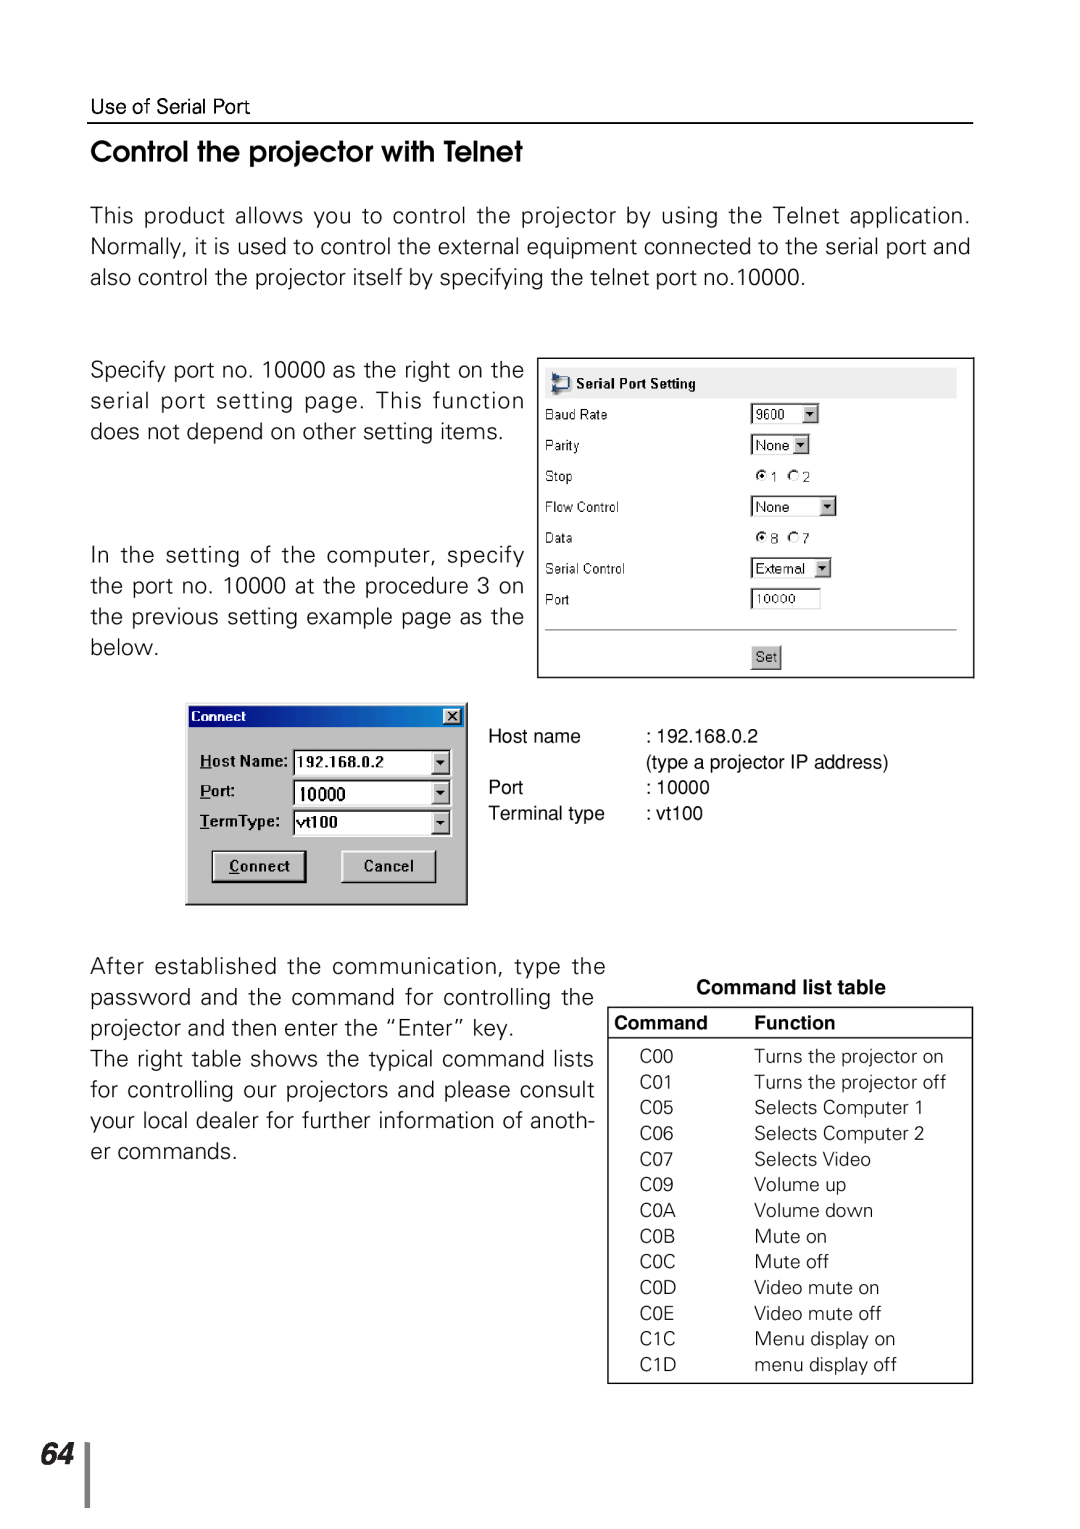 Sanyo POA-PN10 owner manual Control the projector with Telnet, Command list table 